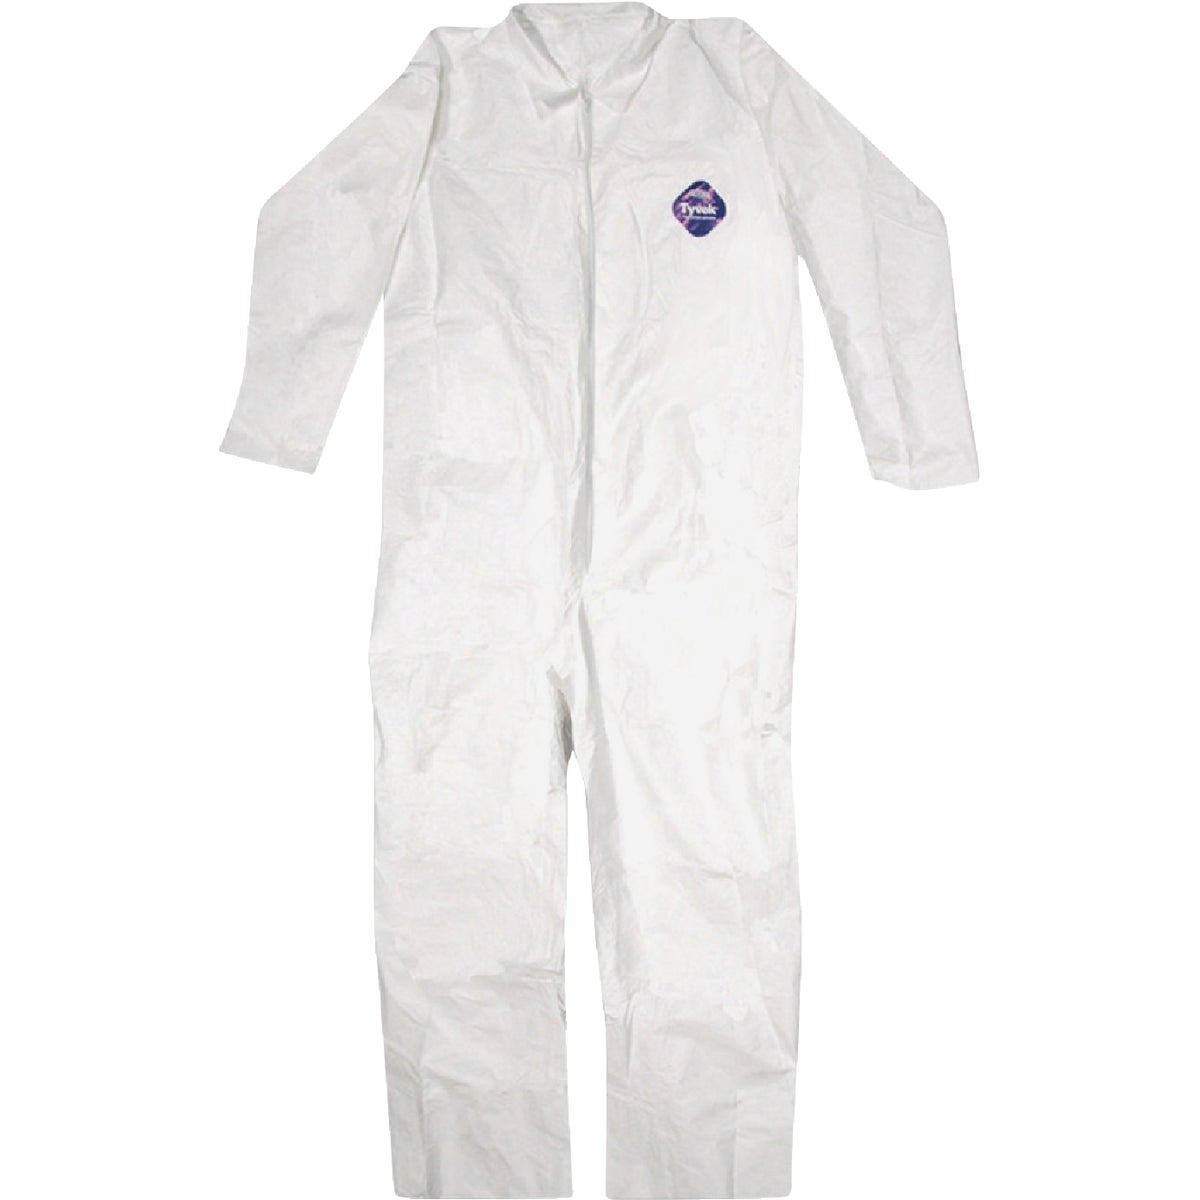 Item 793136, Trimaco's Coveralls made with DuPont's exclusive Tyvek material are heavy-